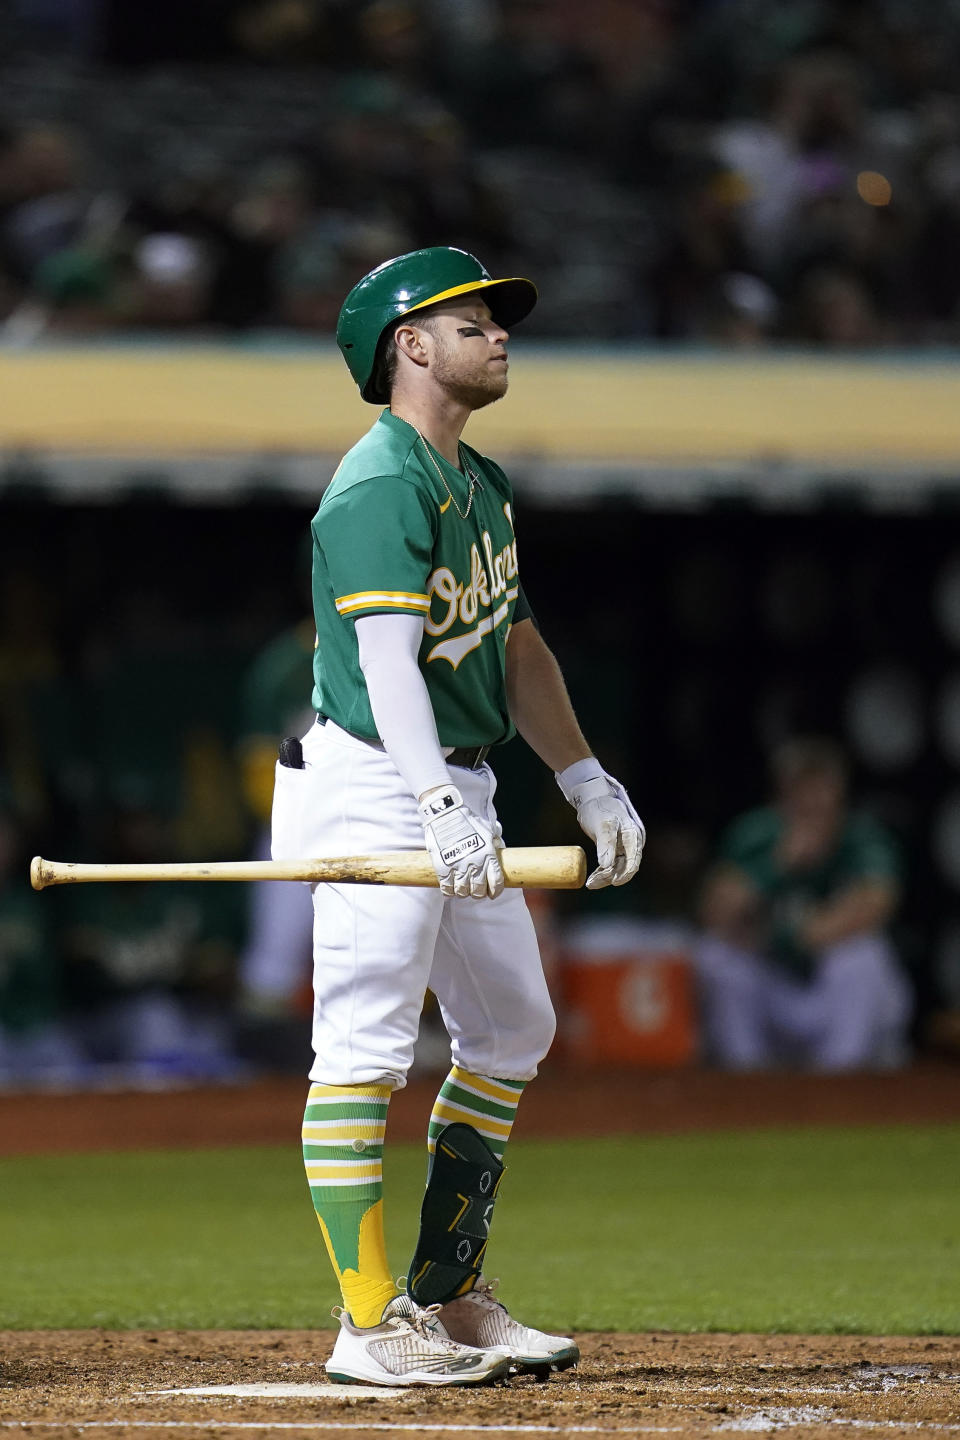 Oakland Athletics' Nick Allen reacts after striking out against the Los Angeles Angels during the fifth inning of a baseball game in Oakland, Calif., Tuesday, Oct. 4, 2022. (AP Photo/Godofredo A. Vásquez)